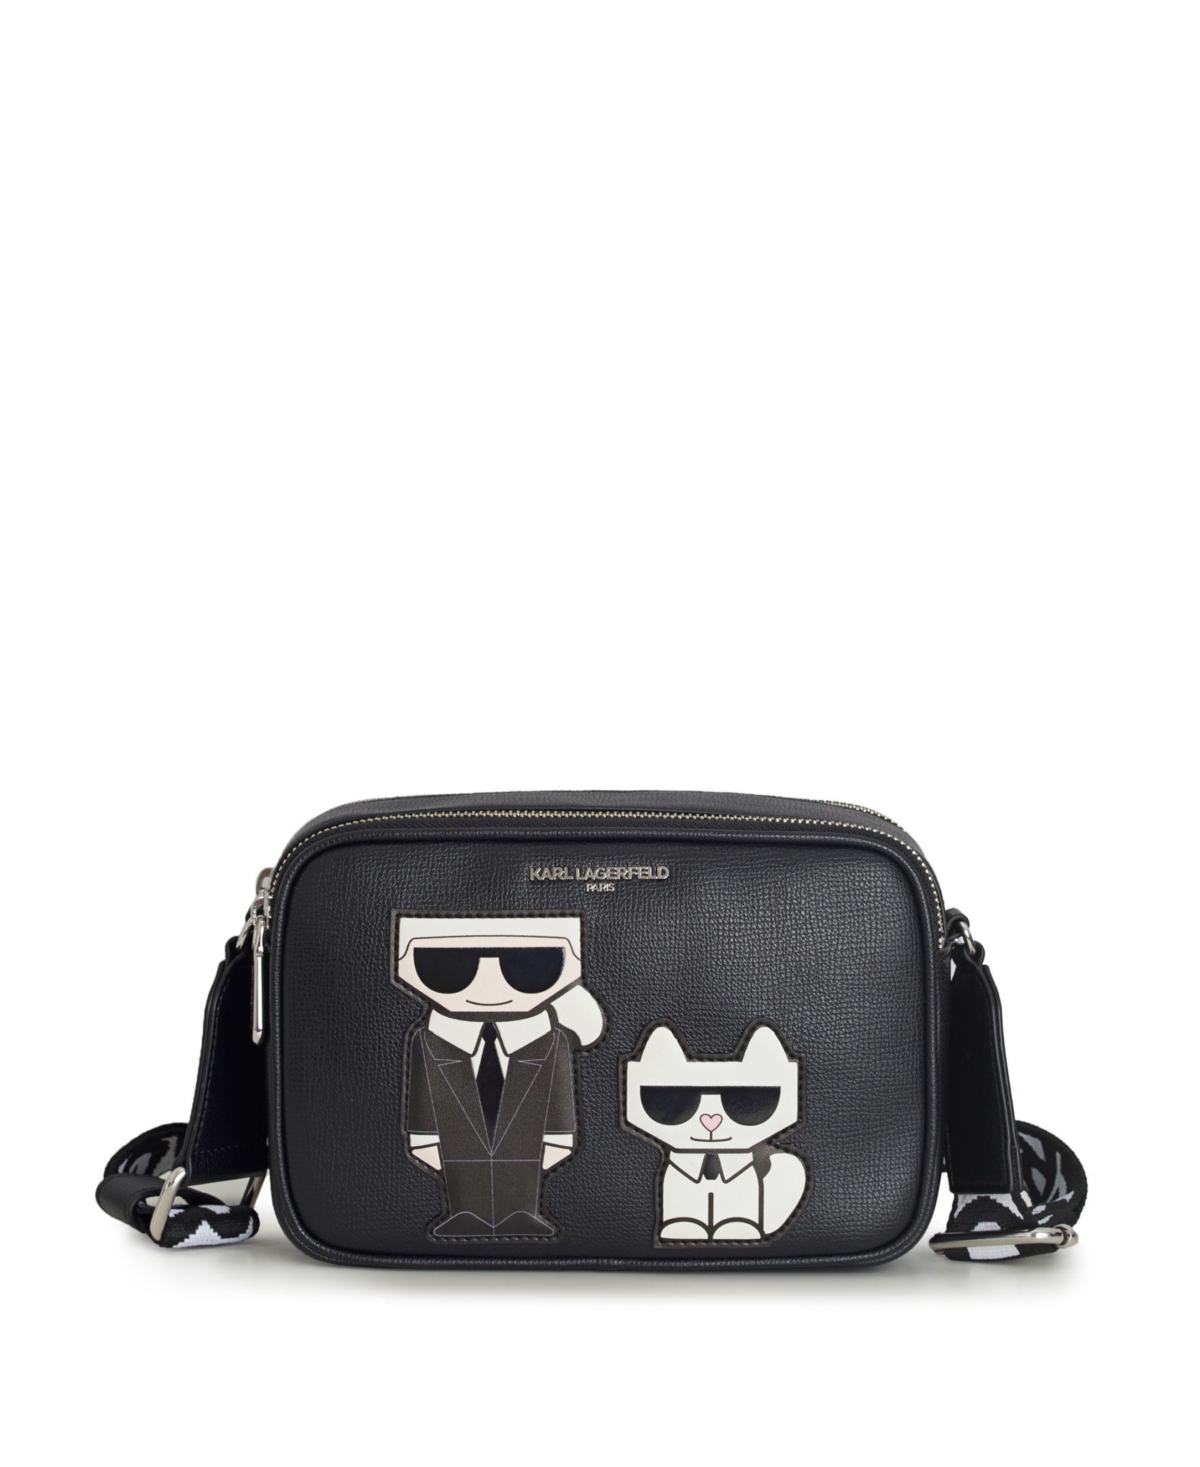  Karl Lagerfeld Paris Women's Maybelle SLG Cosmetic Bag, Black,  One Size : Beauty & Personal Care